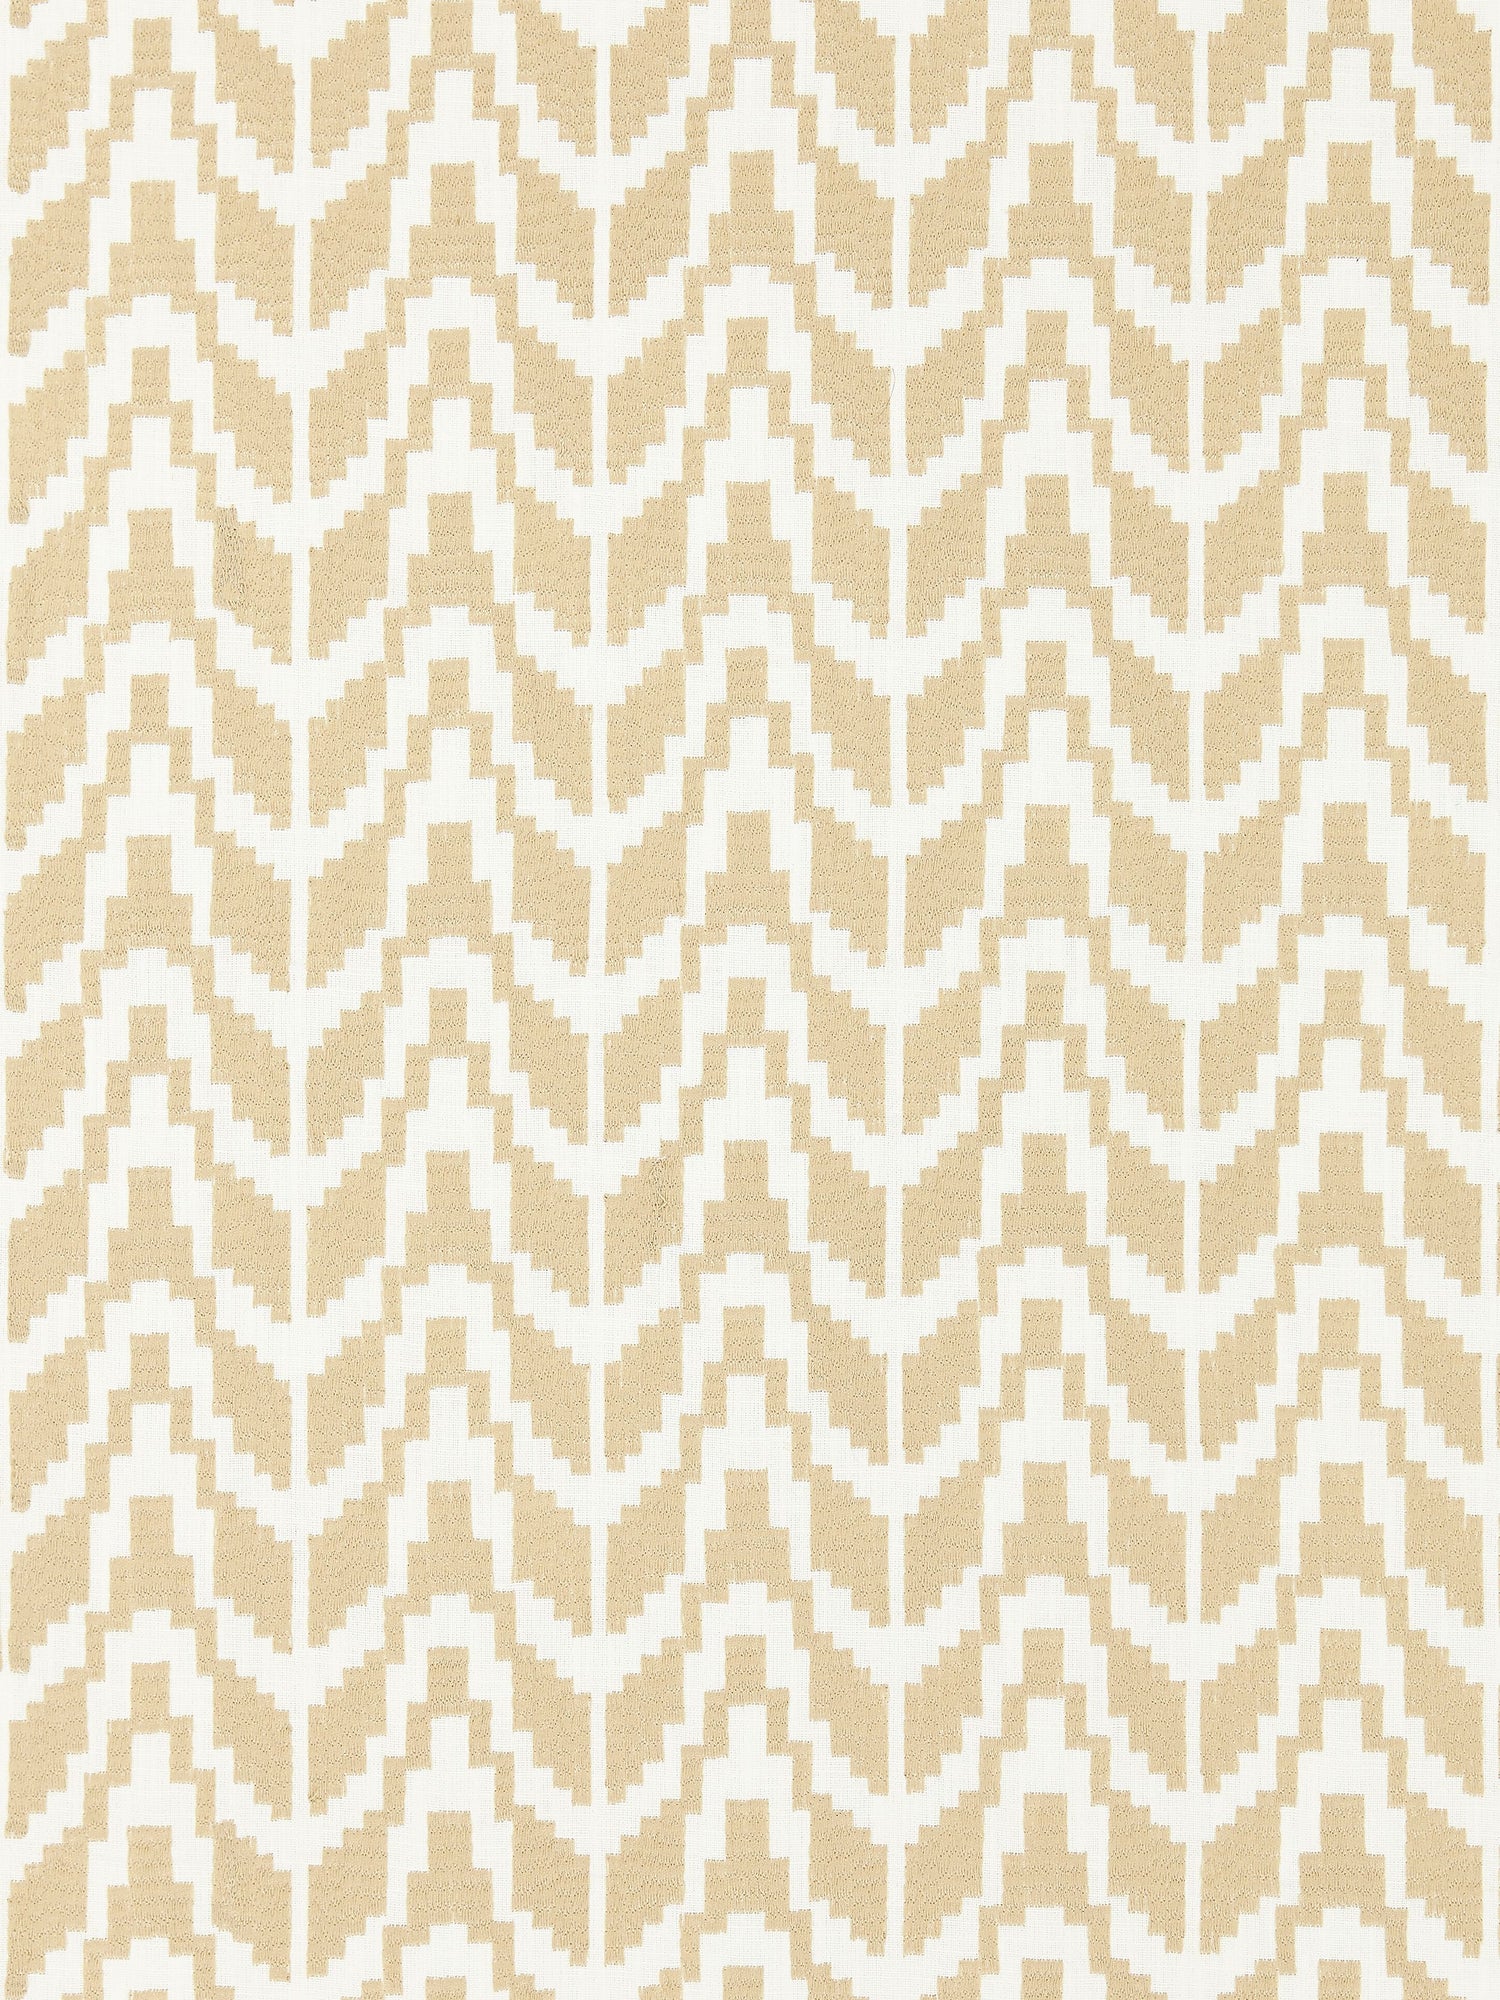 Chevron Embroidery fabric in straw color - pattern number SC 000127103 - by Scalamandre in the Scalamandre Fabrics Book 1 collection